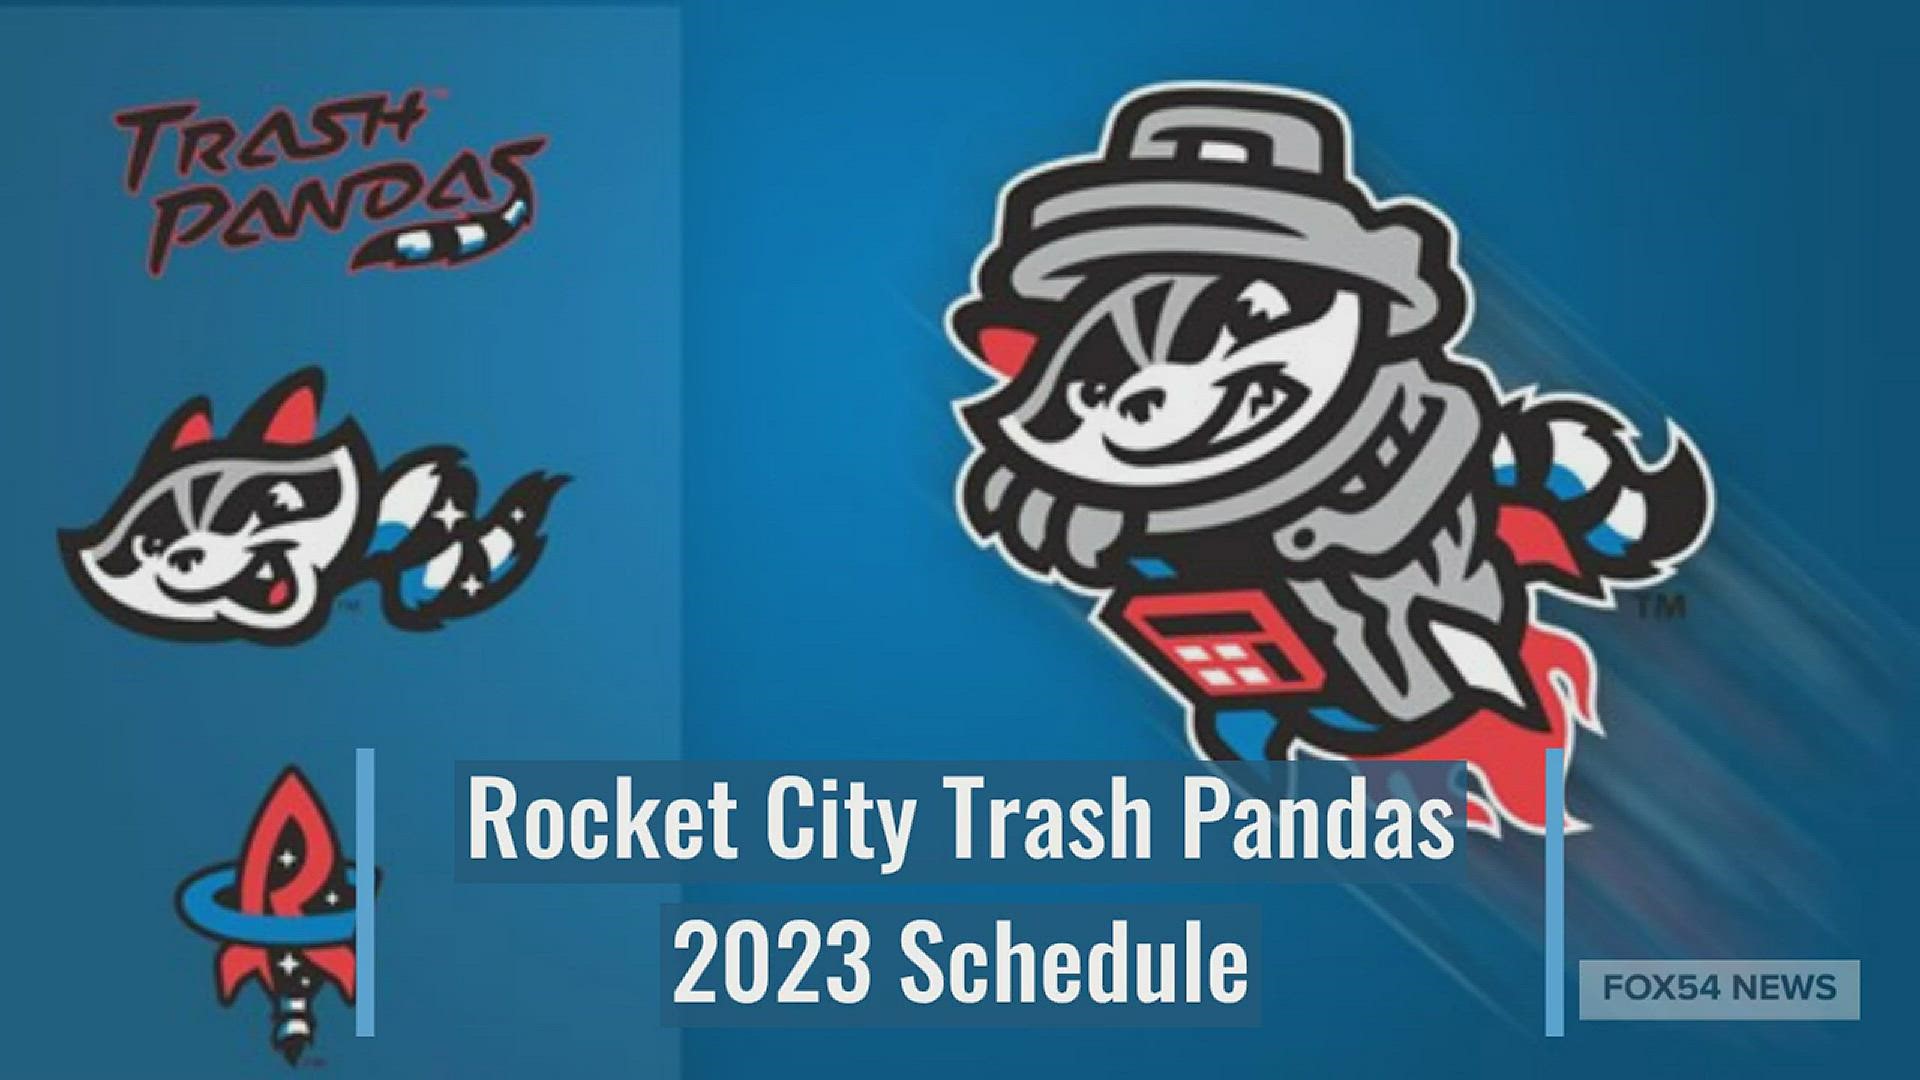 Find out how you can see the Rocket City Trash Pandas in 2023